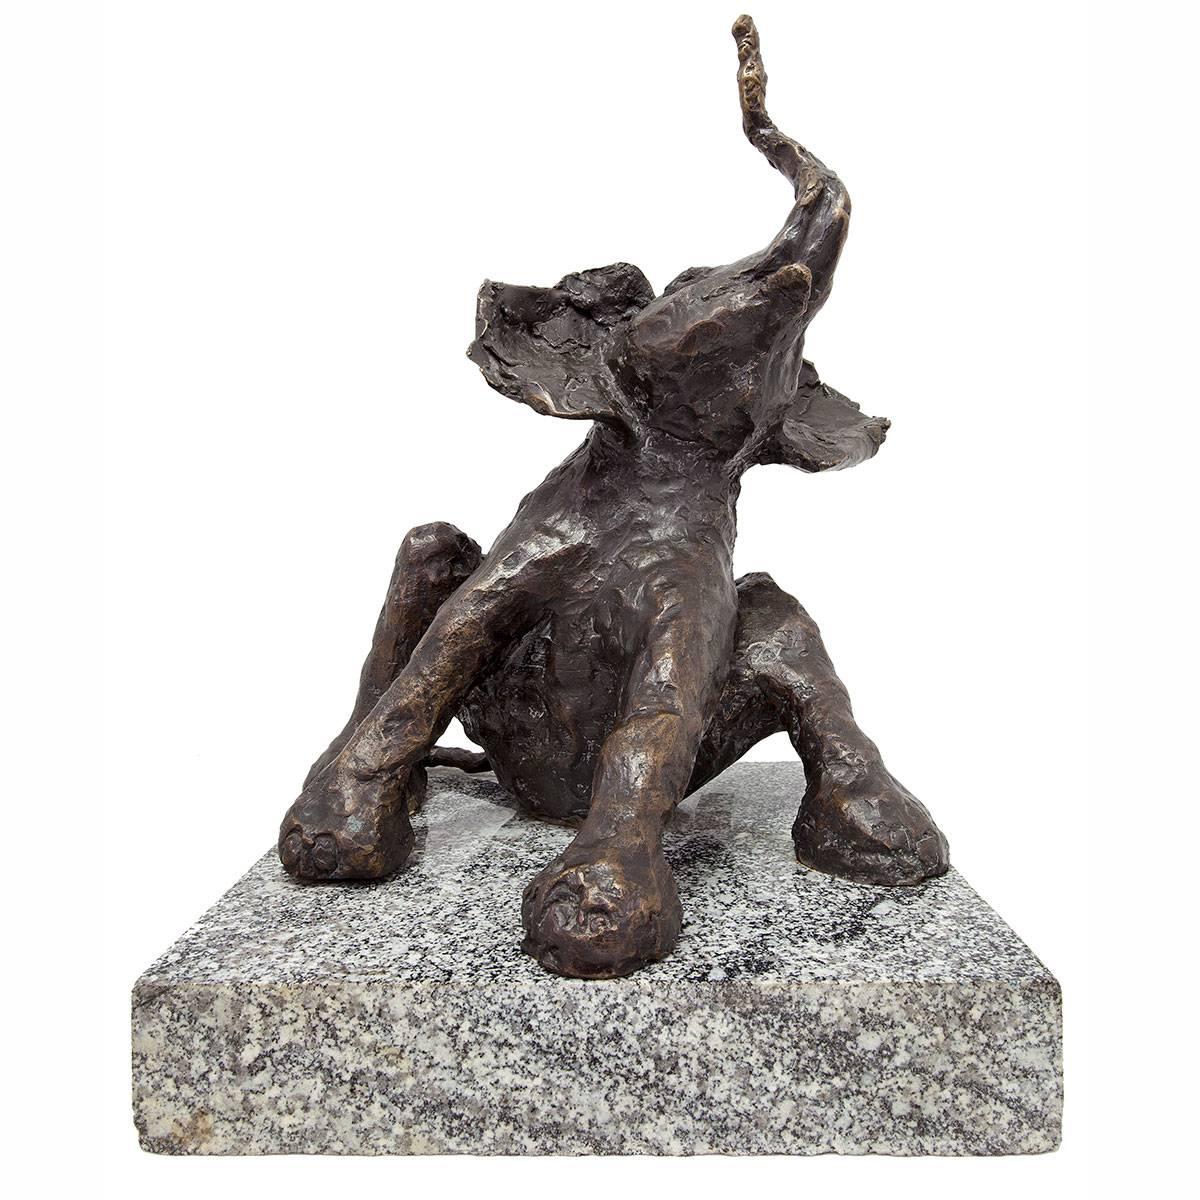 signed bronze from small edition of 8. marked 4/8

Dominik Albiński
(born 1975, South Africa)
He started carving at the age of twelve. When he was eighteen he went to Paris, where he studied at the prestigious Science Po. In 1997 he came to Poland